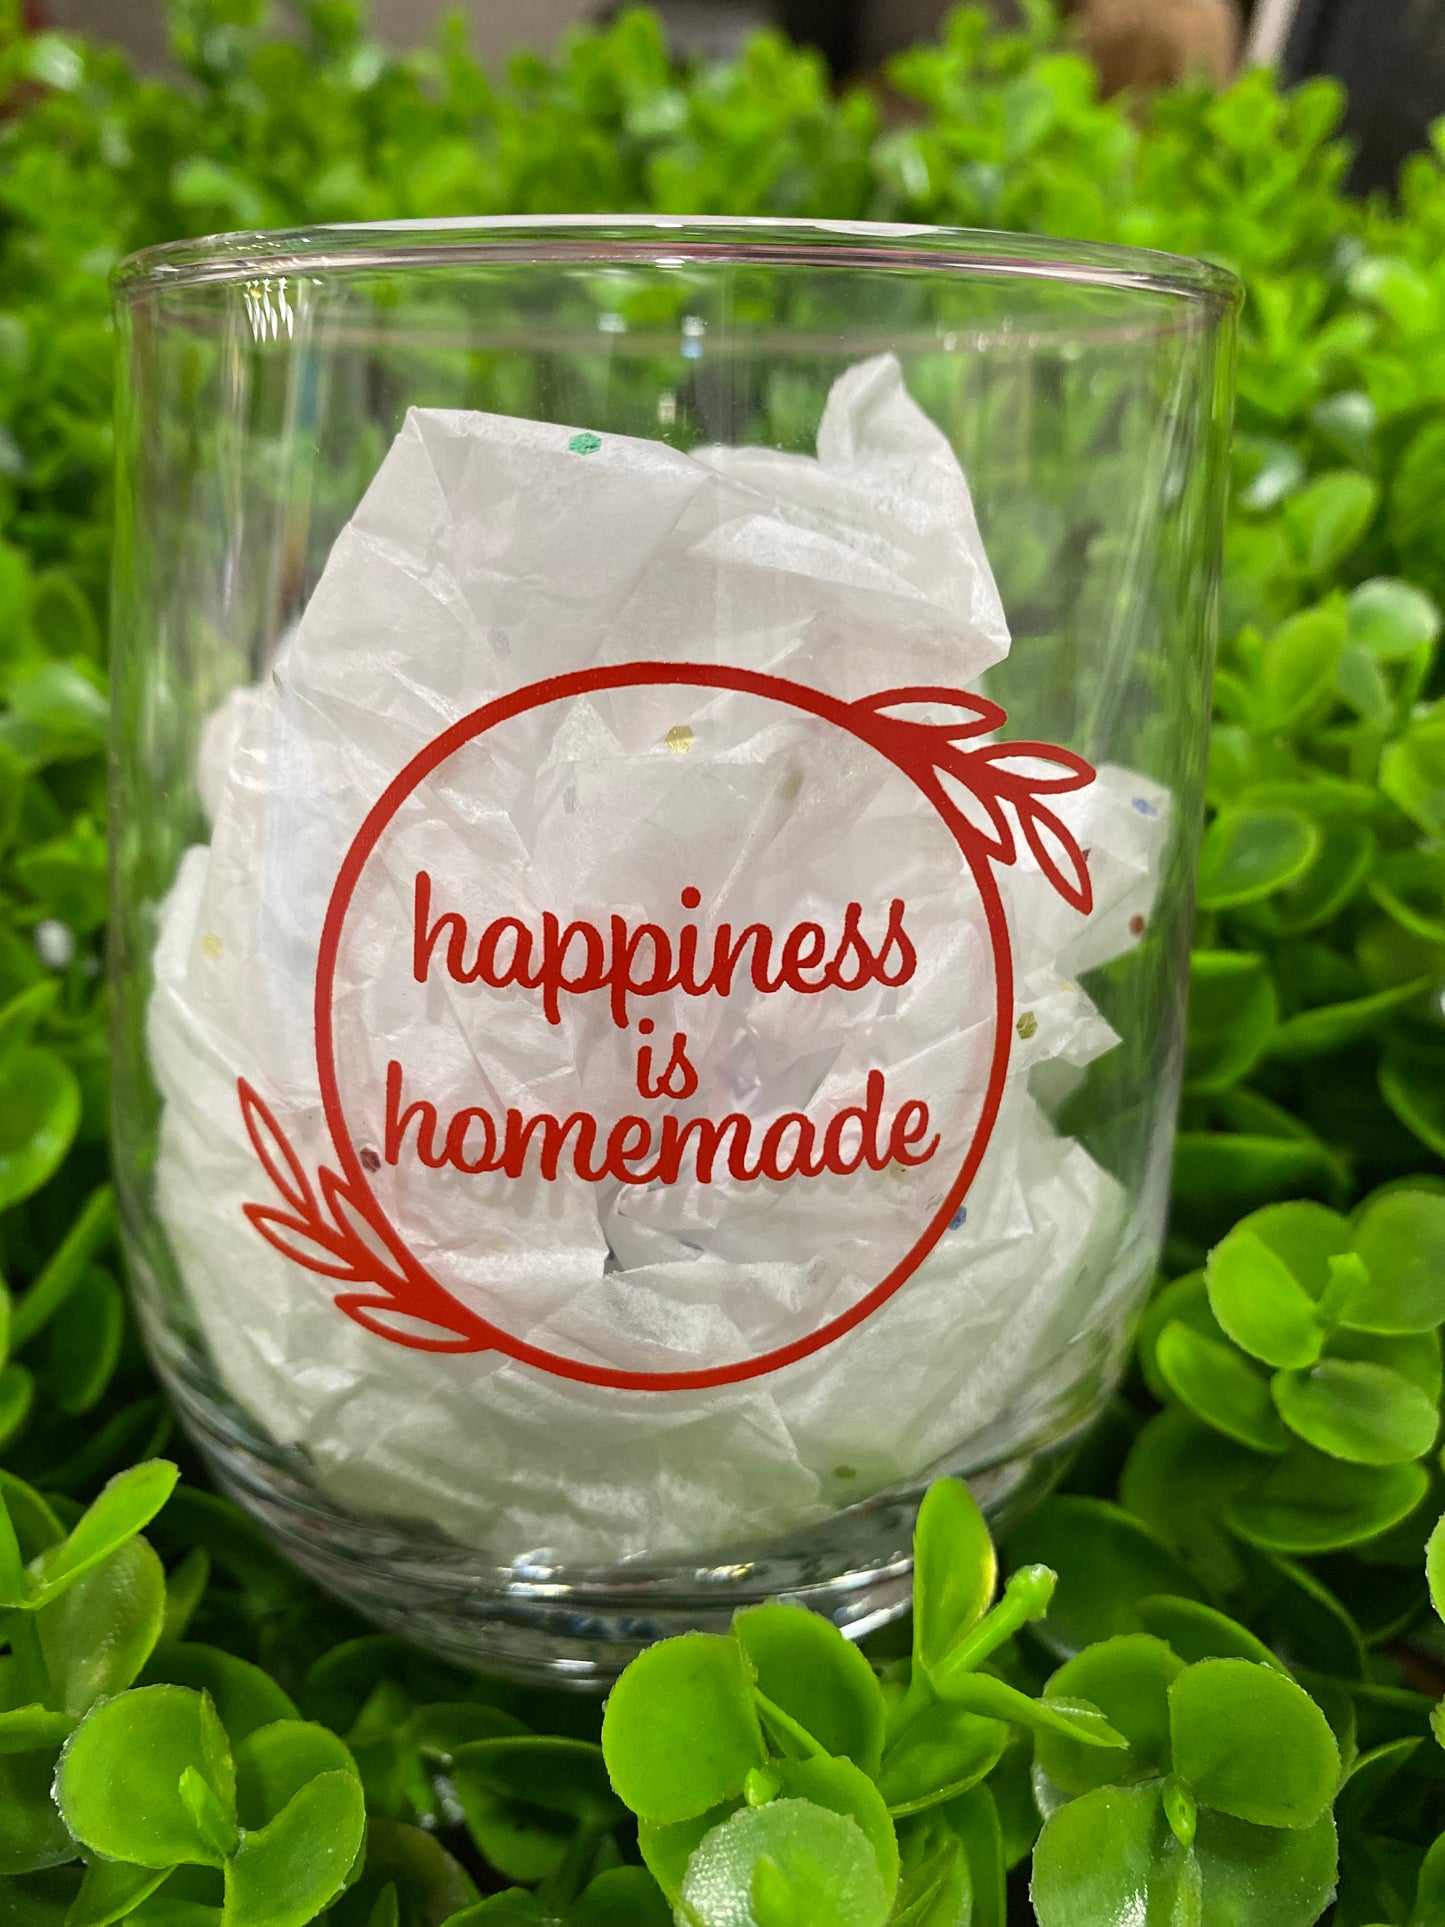 Copa:  Happiness is homemade